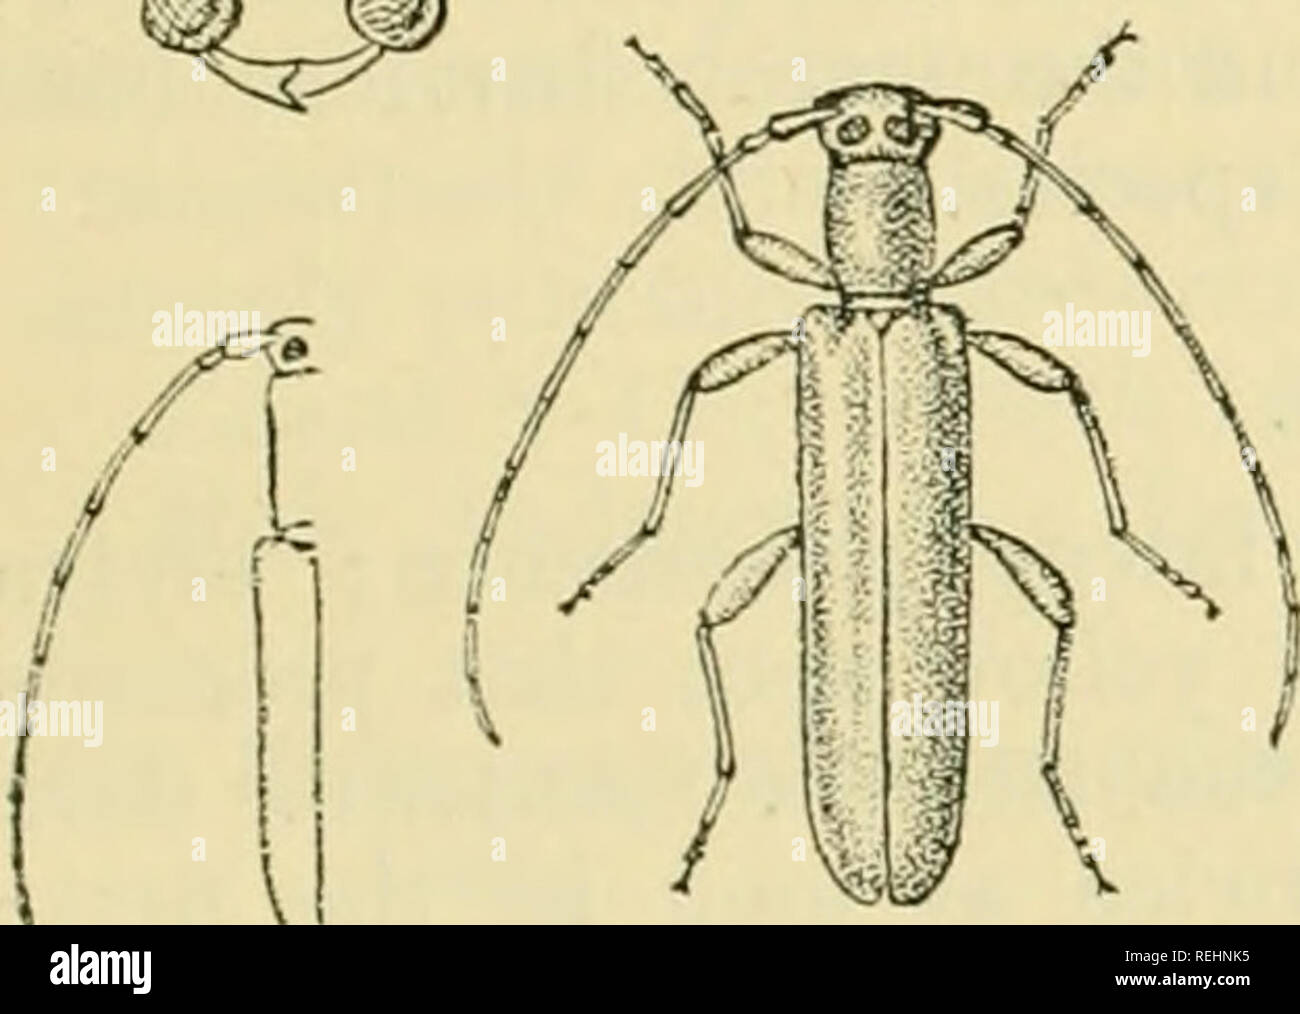 . Coleoptera. Vol. I. [Longicornia. Part I.]. Beetles; Cerambycidae. a?BTEAOMMATUS. 101 very short; front coxee contiguous, tlieir acetabula angulate out- wards and open posteriorly ; middle coxae almost contiguous. Temora rather long, pedunculate and somewhat curved at the base, fusiform and compressed in their distal half. Tarsi long and narrow; the first joint of the middle and hind pairs almost or quite as long as the remaining three united ; cleft of the third joint extends less than halfway tcrthe base. I. ProiJiorax unarmed at the sides. 92. Tetraonimatus filiformis, Fei-roud, Ayw, Soc  Stock Photo